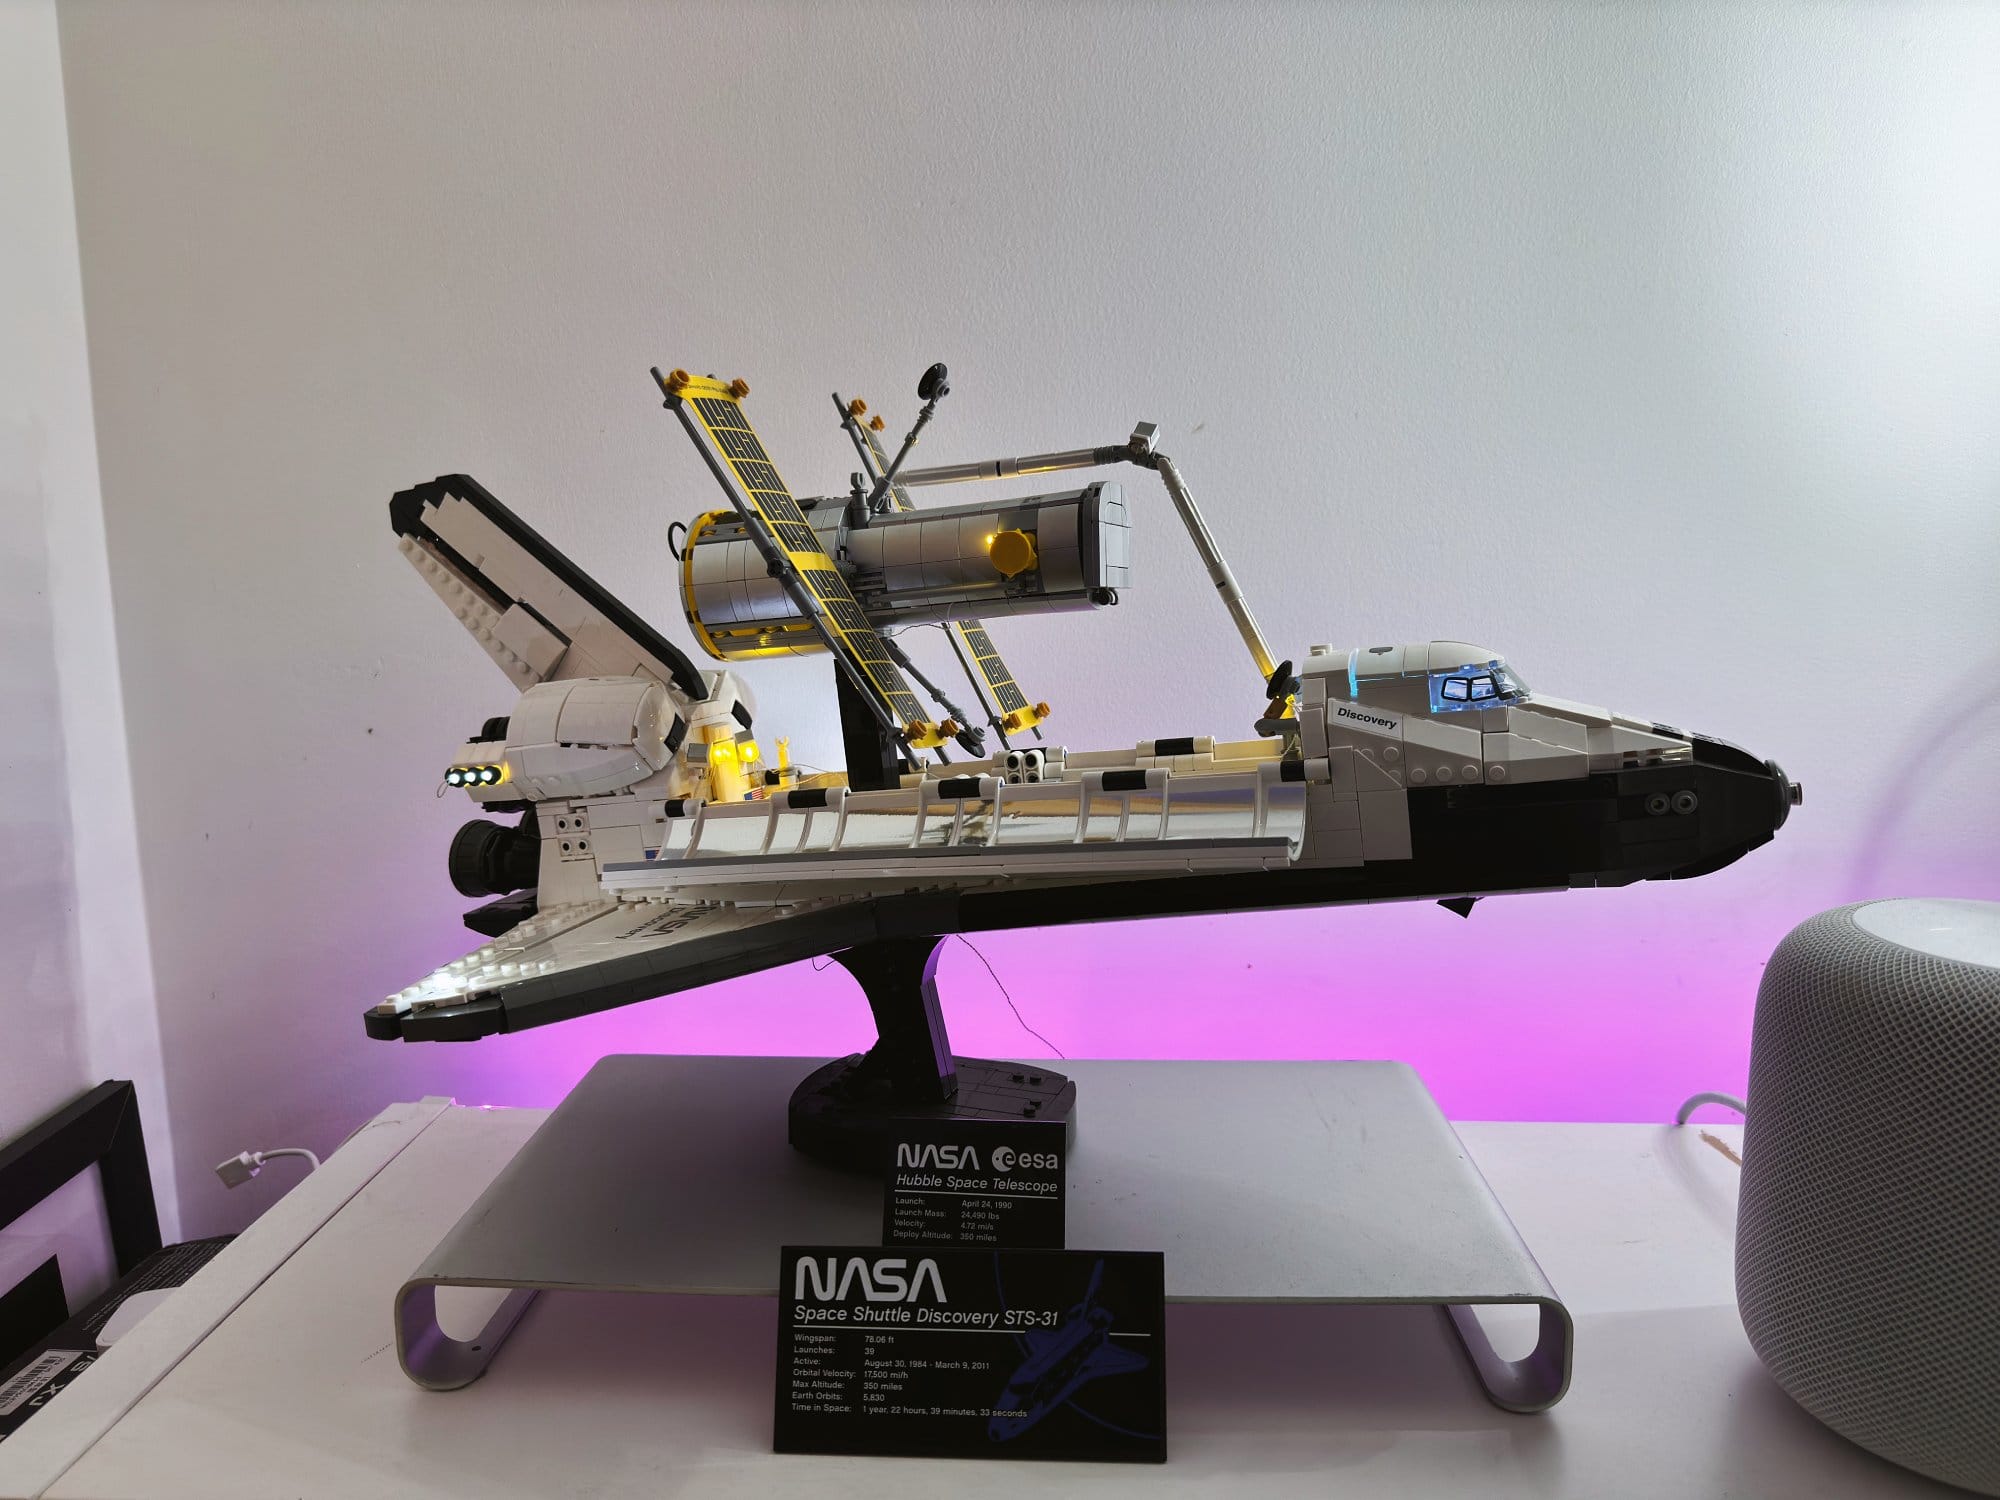 A detailed LEGO model of the NASA Space Shuttle Discovery on a stand, displayed against a backdrop of ambient purple lighting